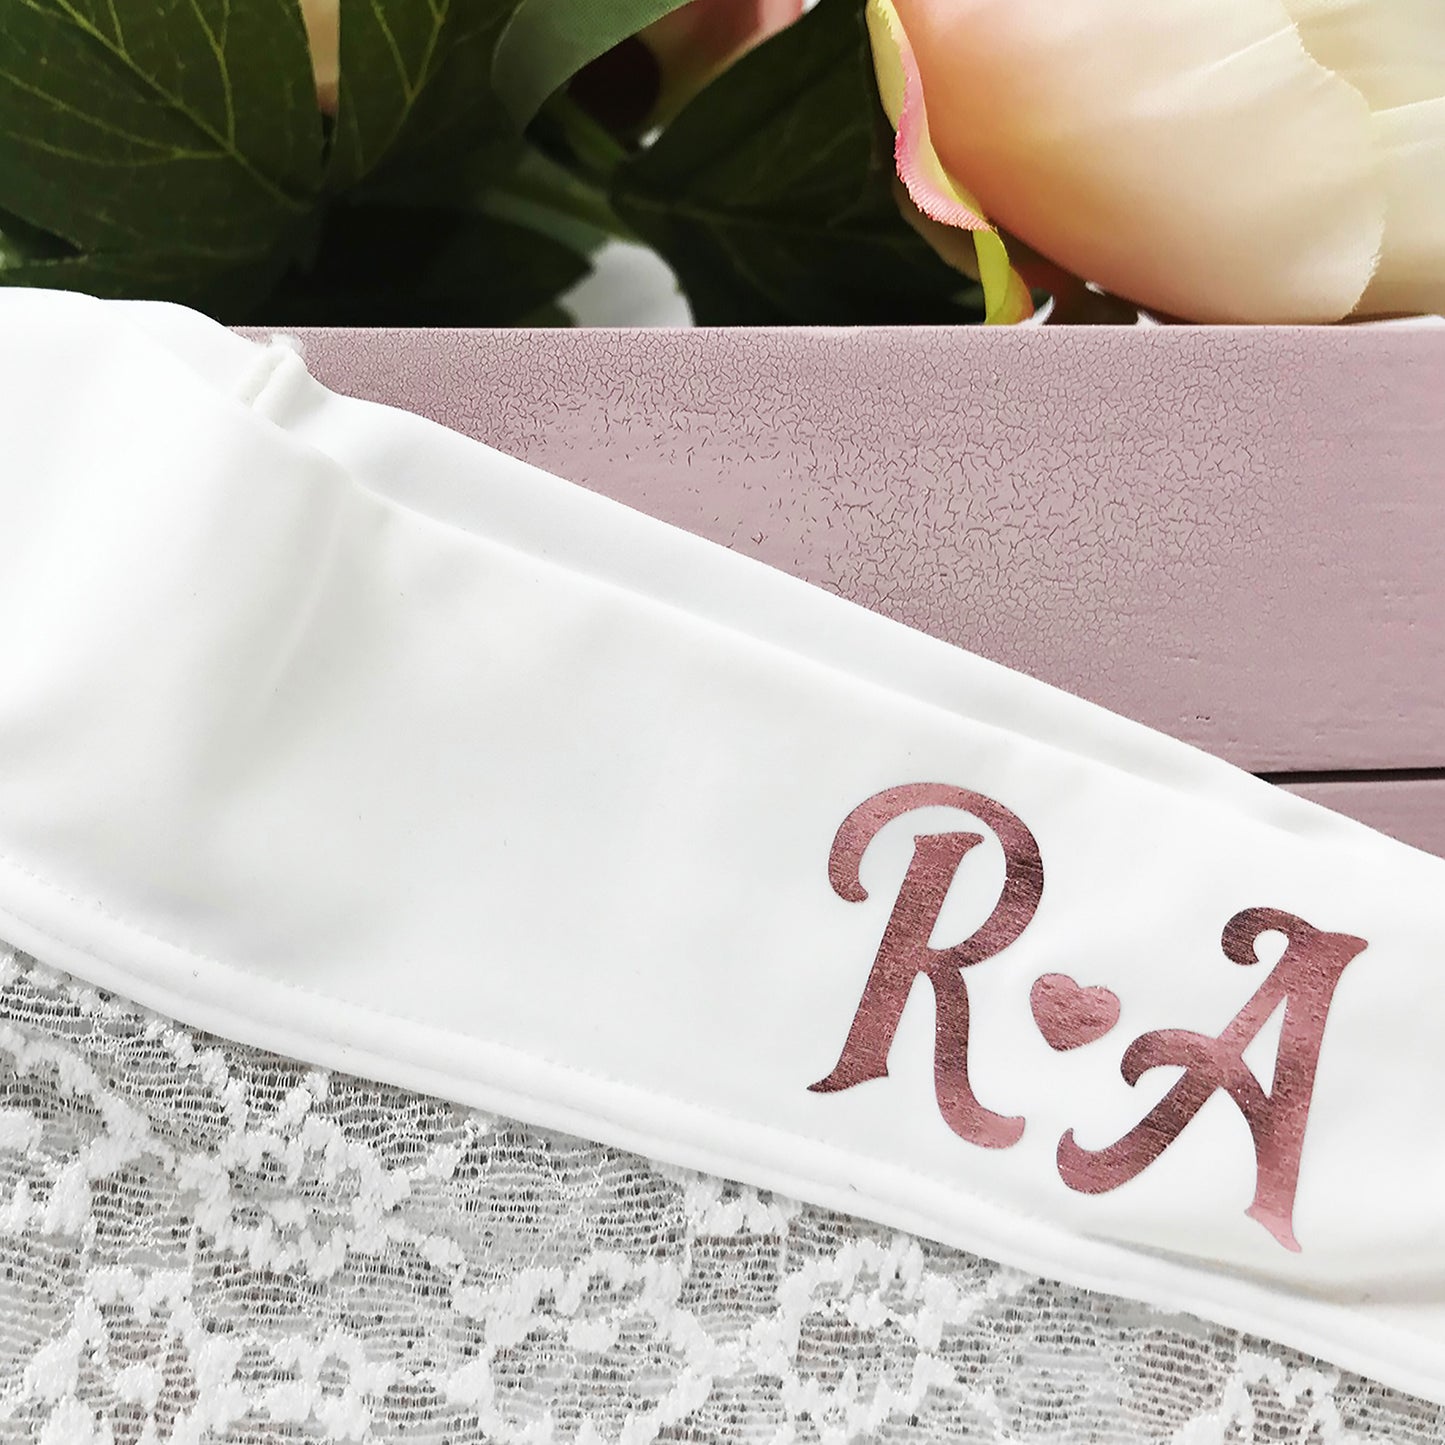 Personalised Ivory Lace Bridal Briefs - FREE UK SHIPPING